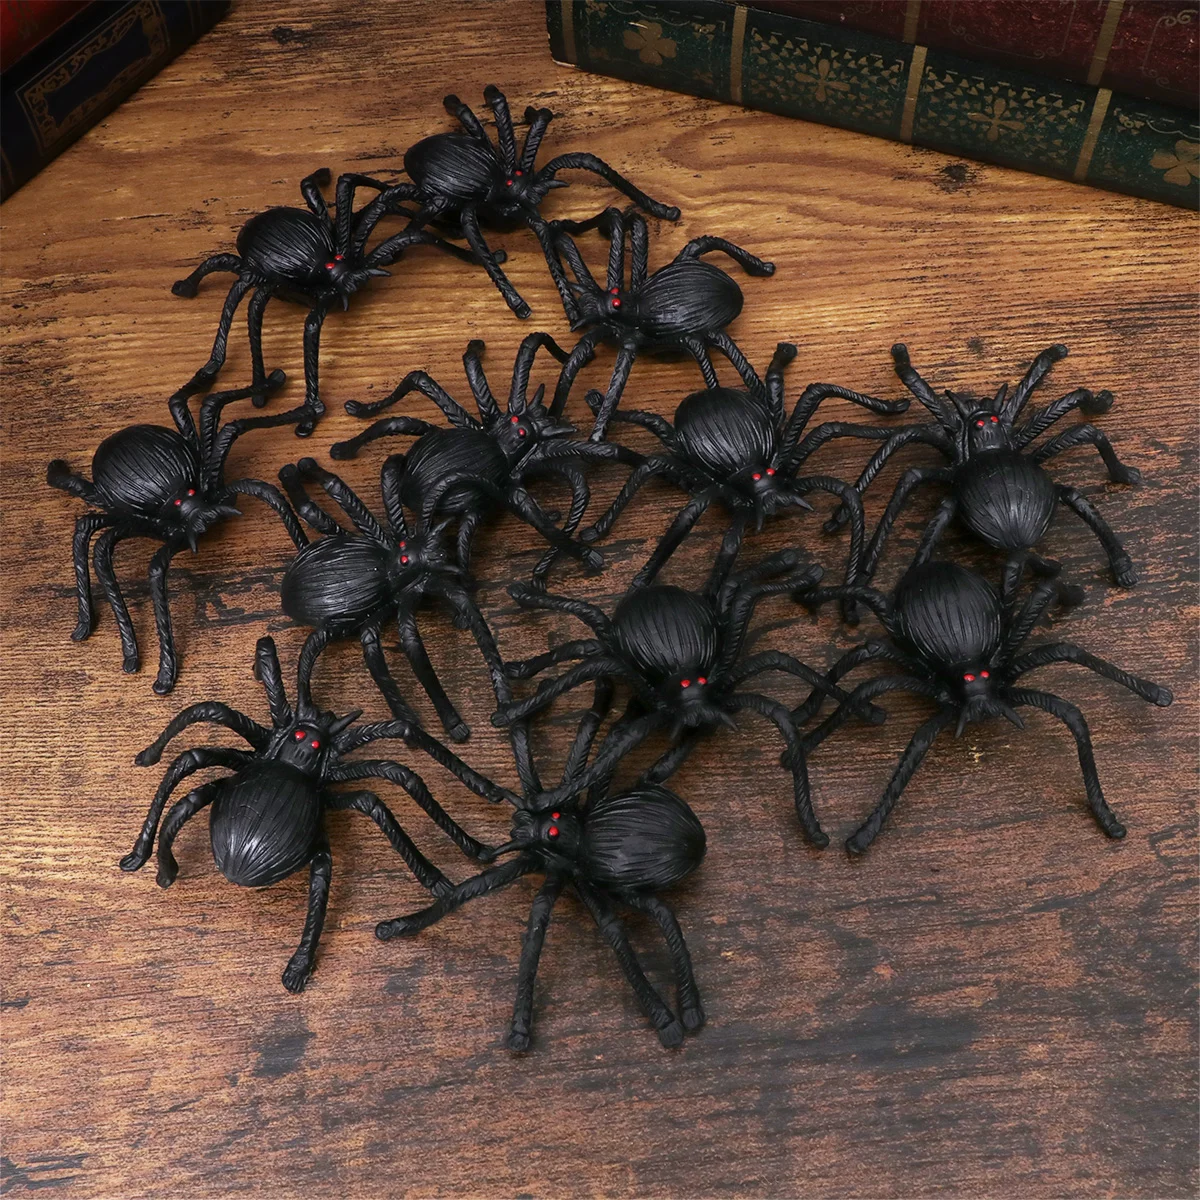 

20 Spider Realistic Hairy Spiders Spider Scary Spider Props for Indoor Outdoor and Creepy Decor